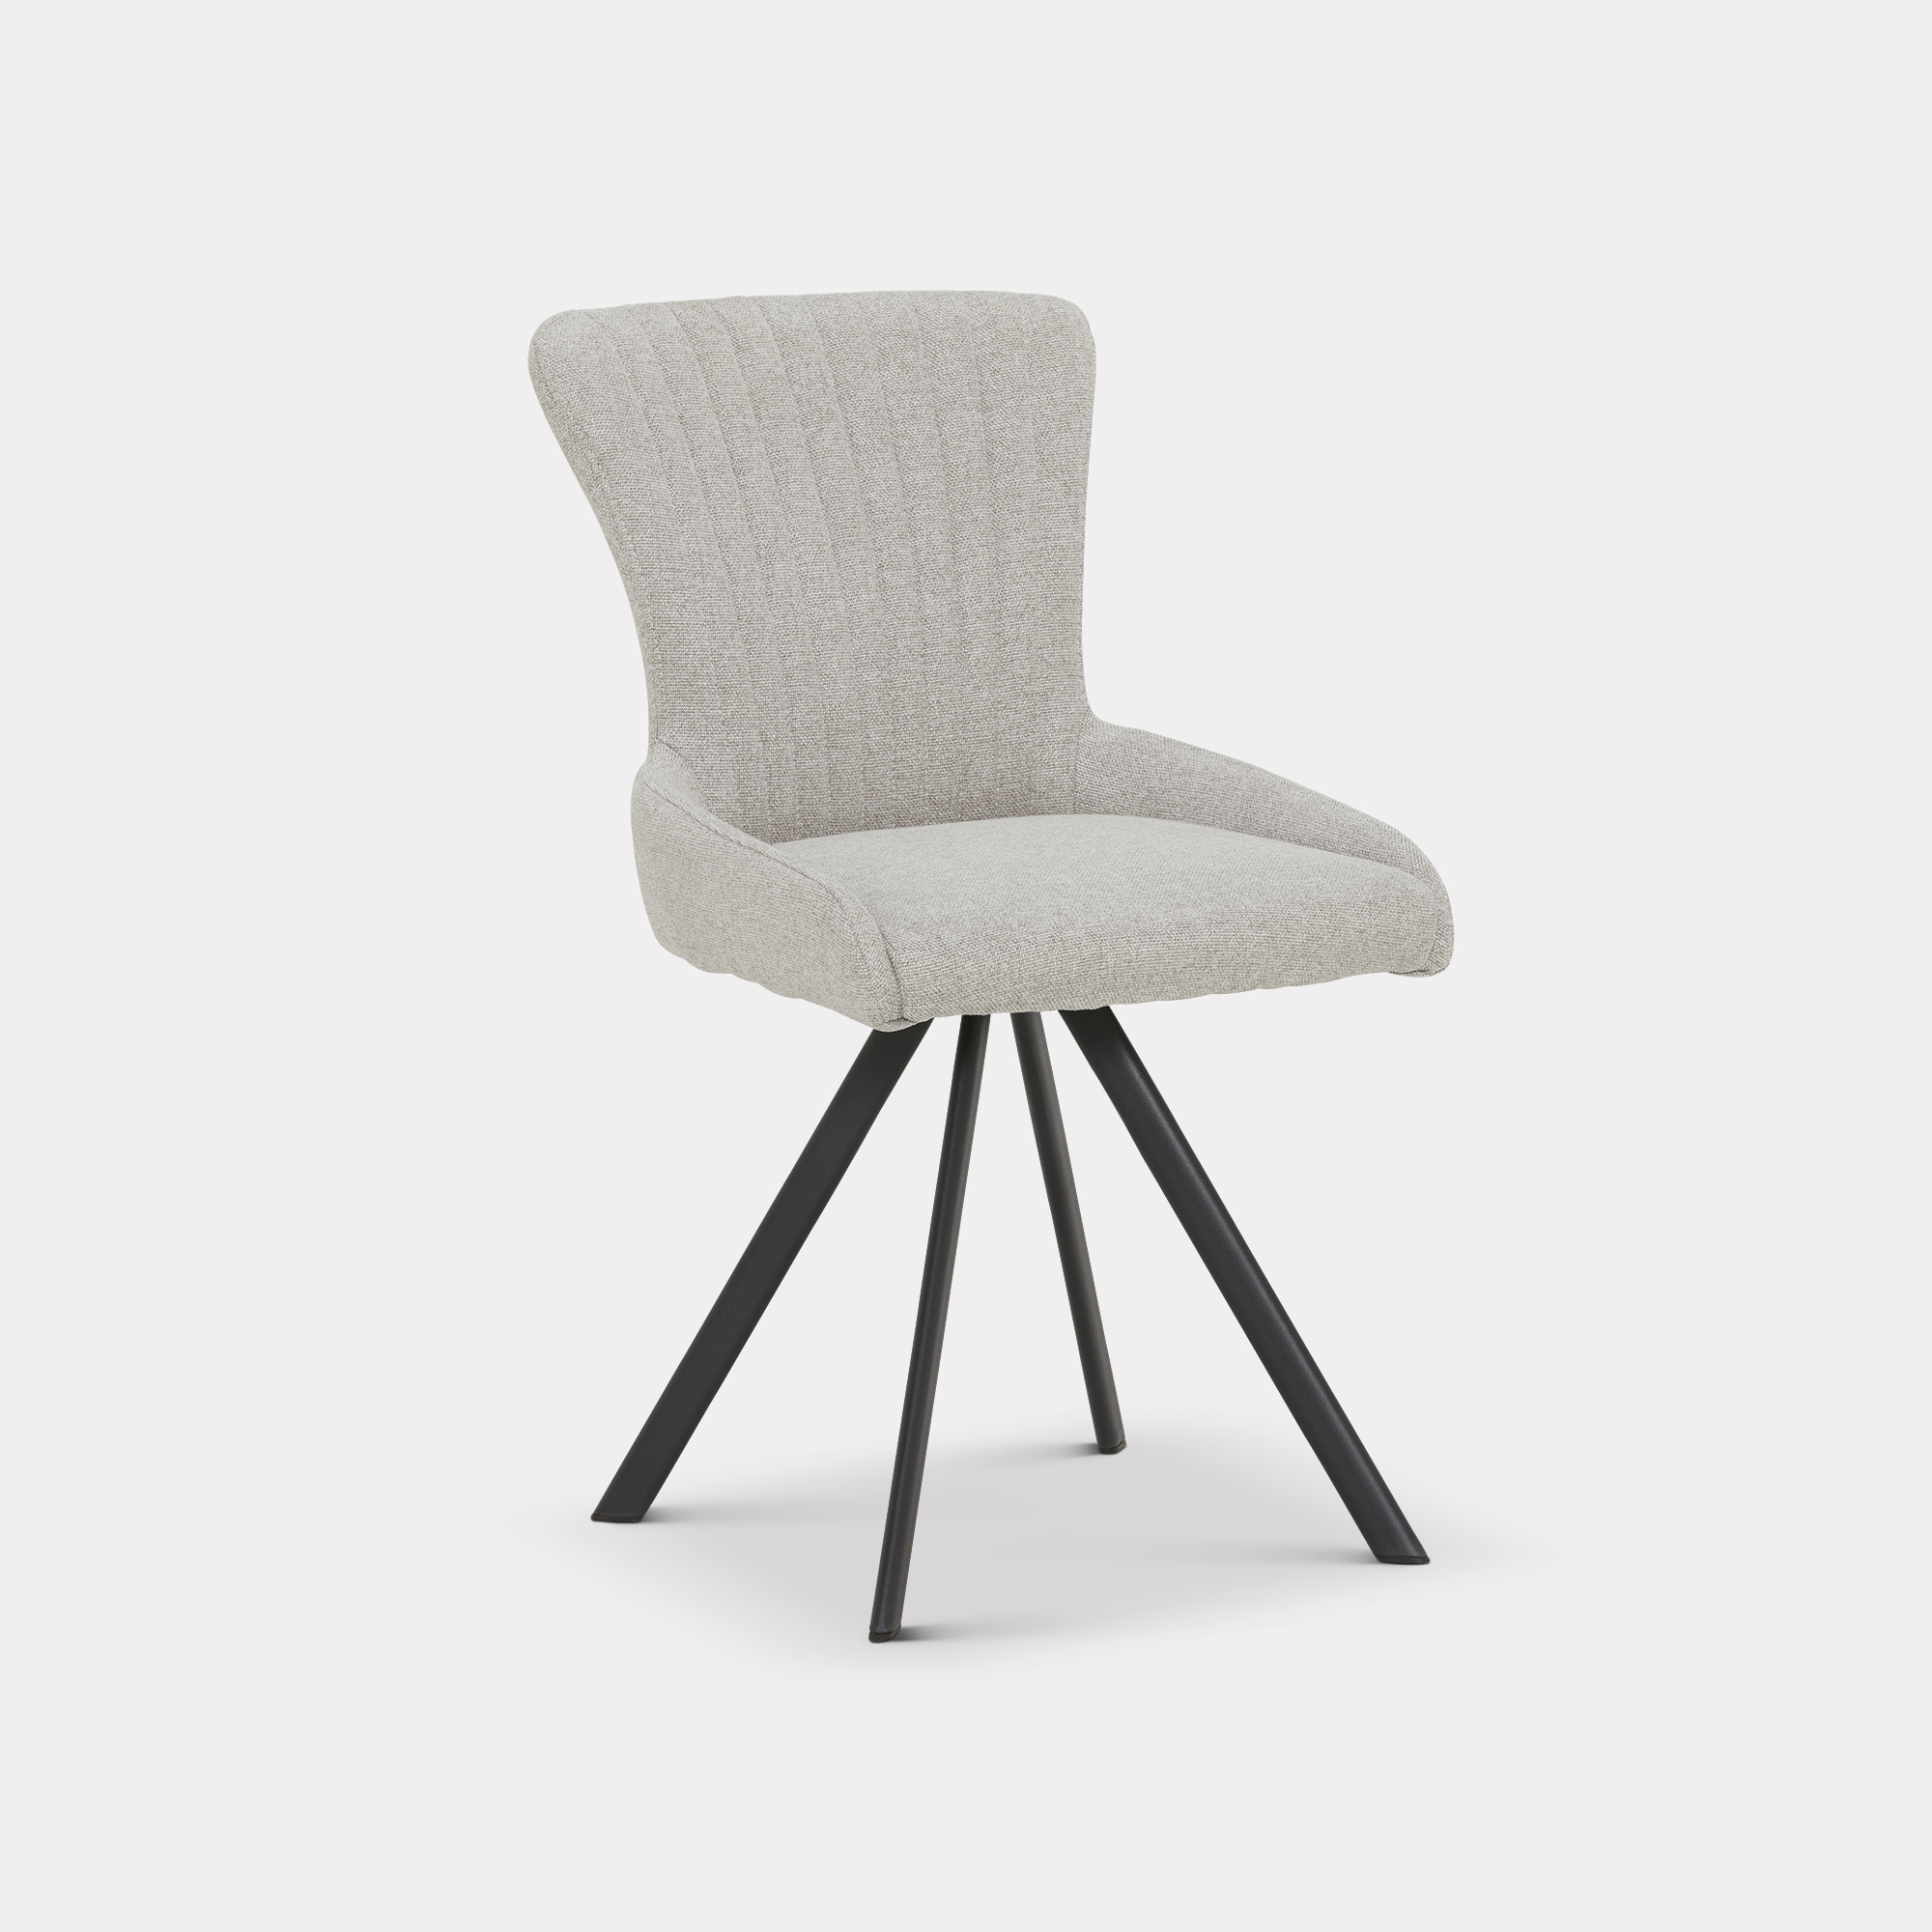 Electra Side Swivel Dining Chair Light Grey Fabric | Barker & Stonehouse